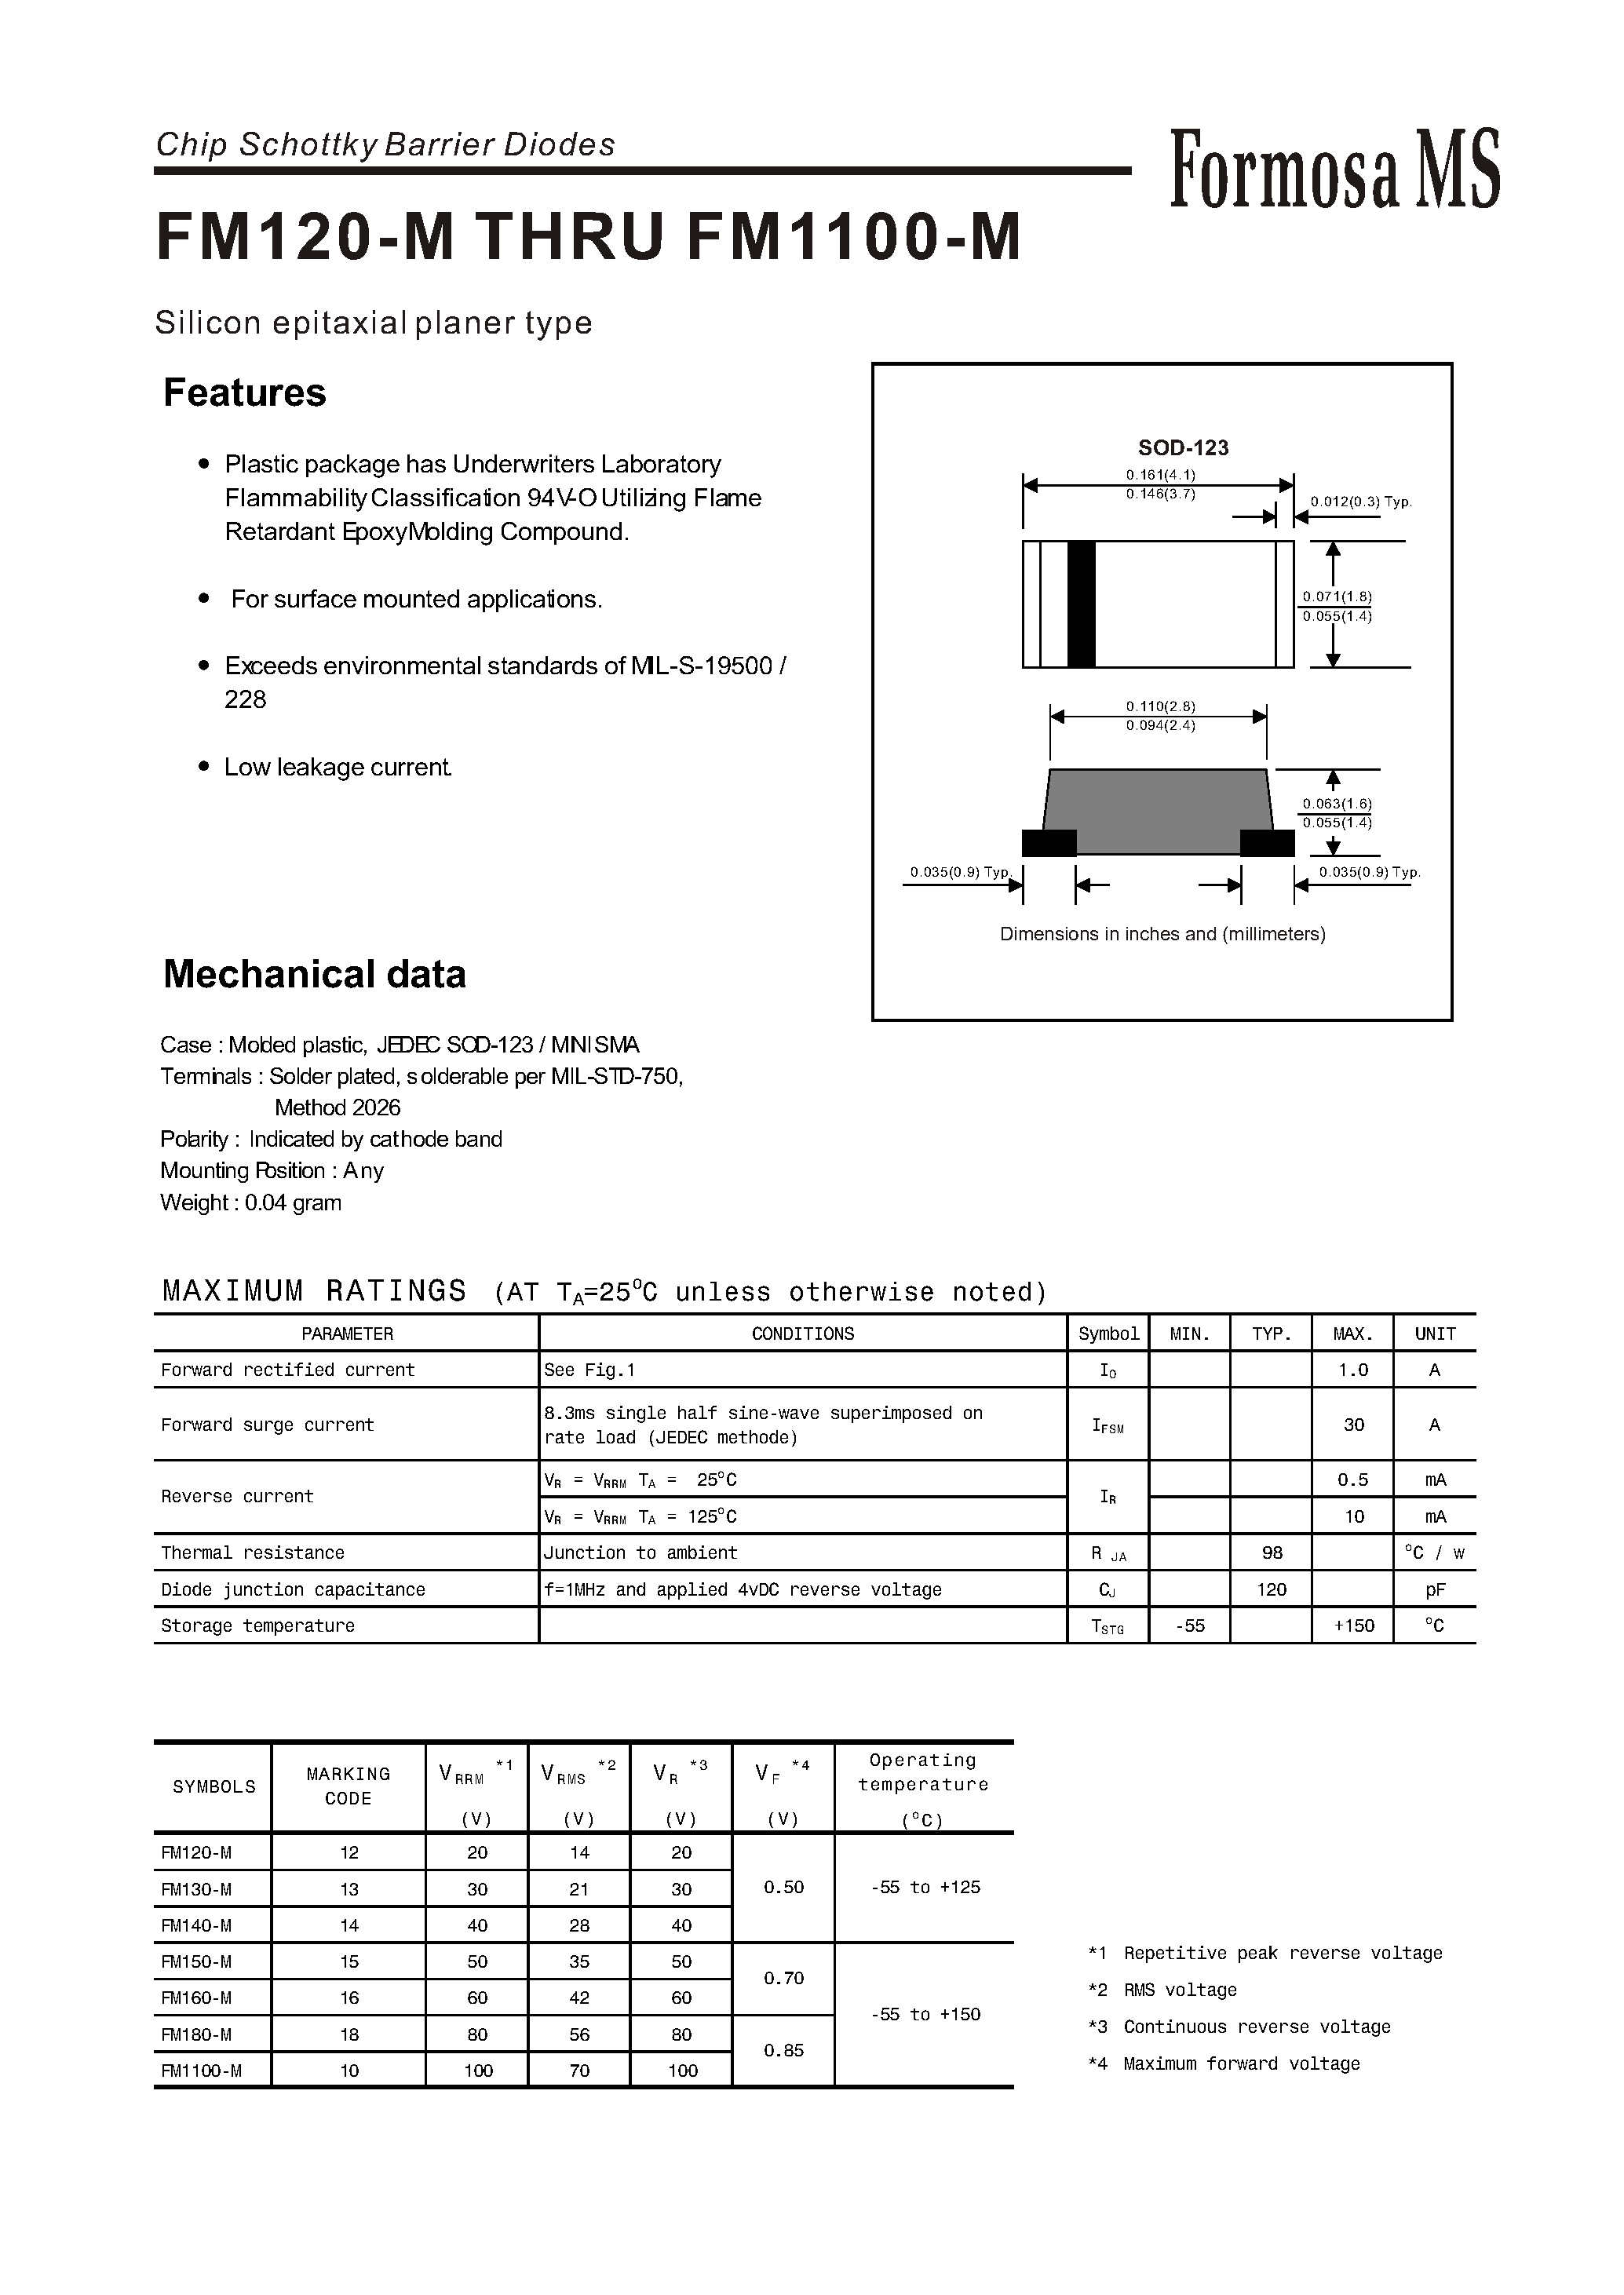 Datasheet FM160-M - Silicon epitaxial planer type page 1